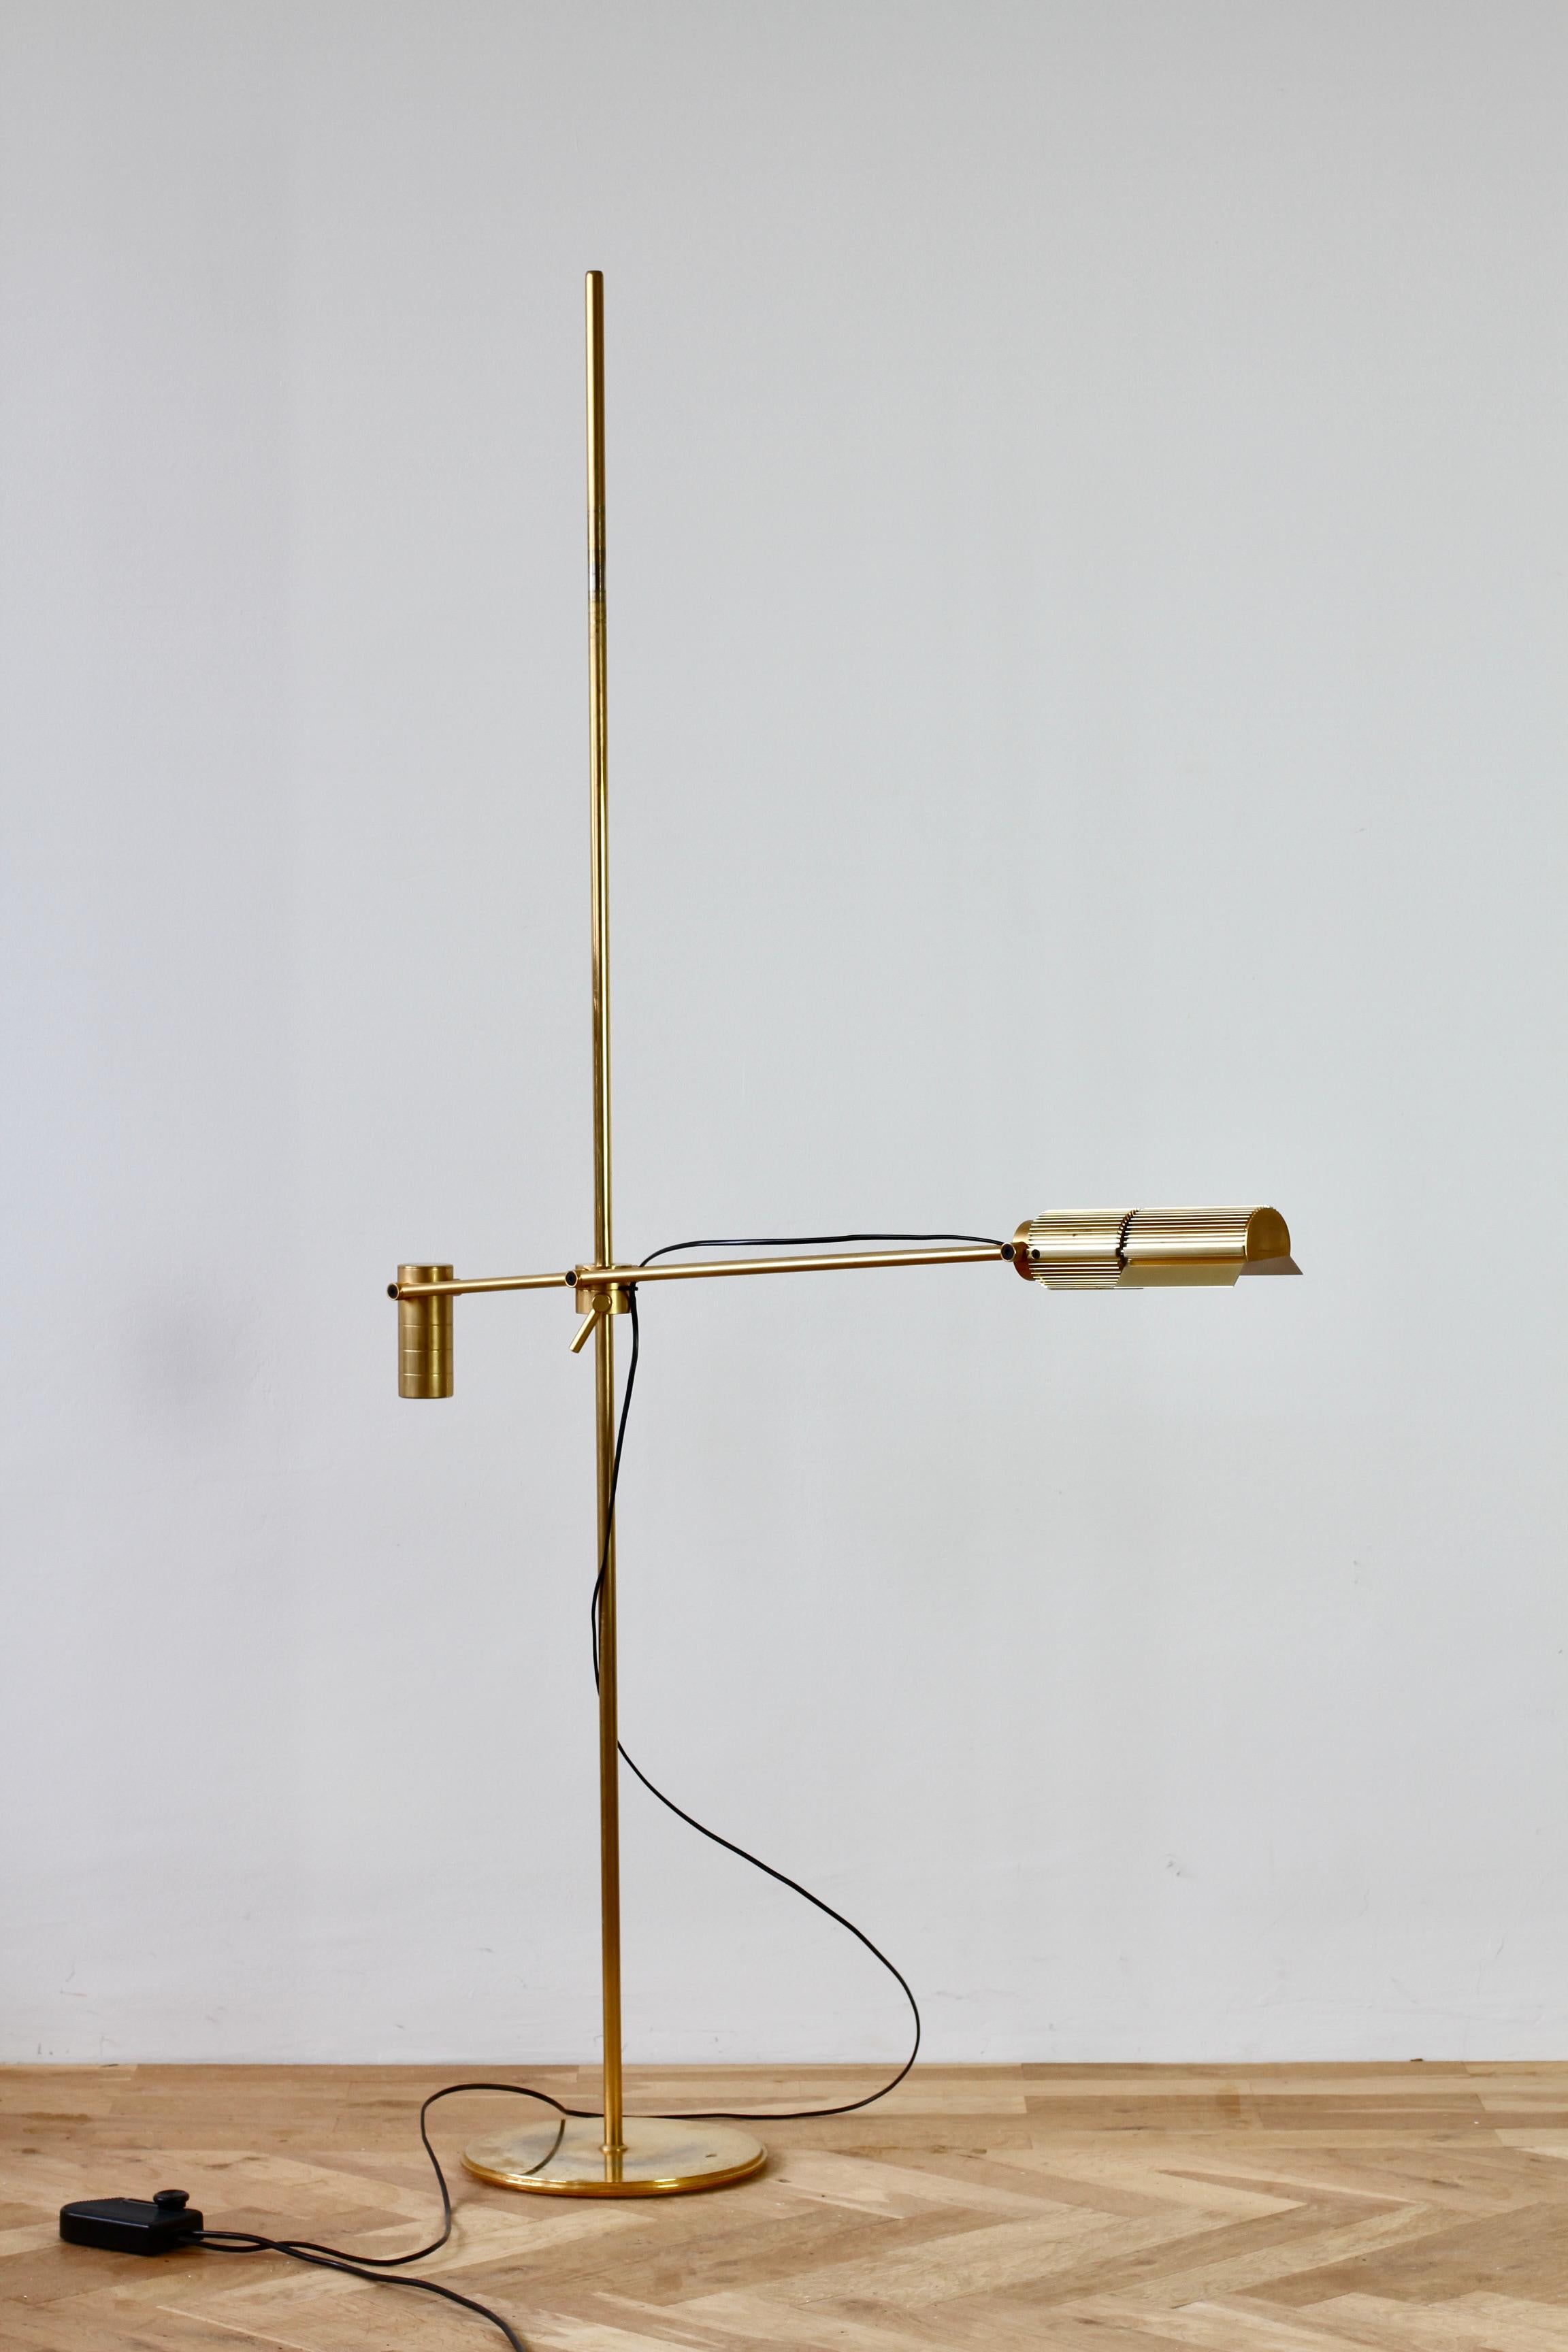 Lacquered Swiss Lamps Gold Plated Brass Vintage Modernist 1970s Adjustable Floor Lamp  For Sale